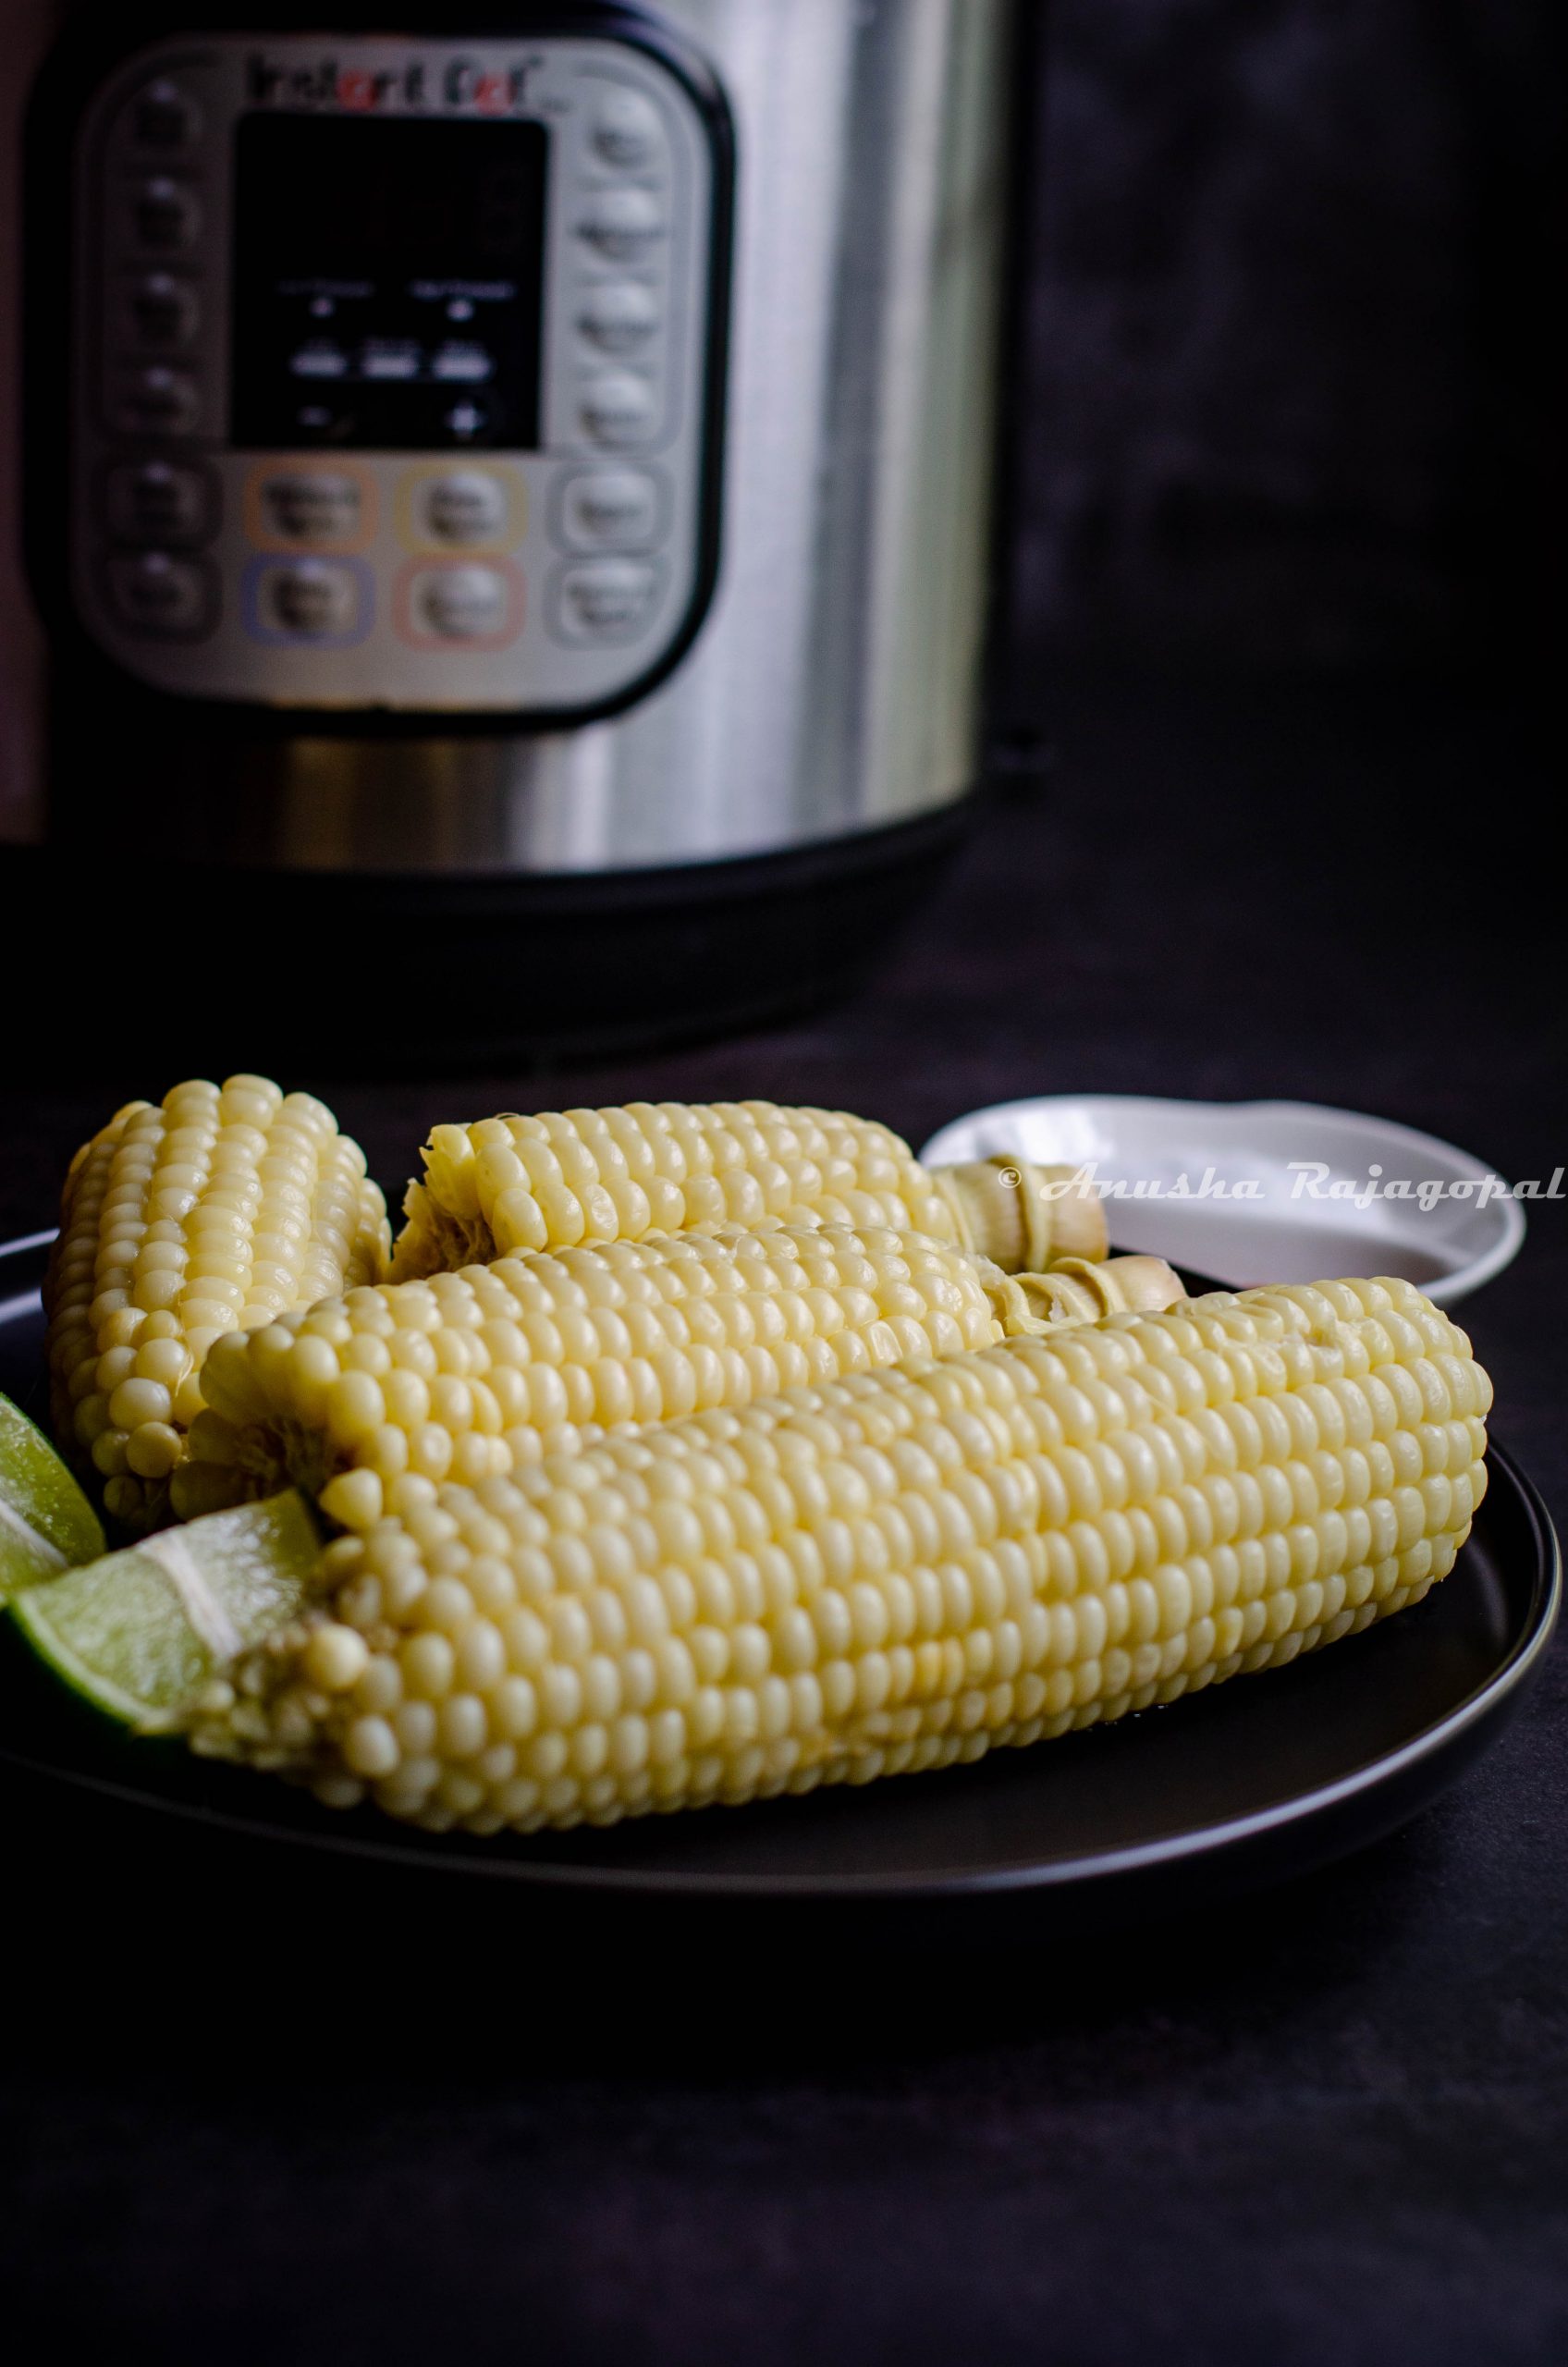 corn on the cob made in the instant pot and served on a black plate